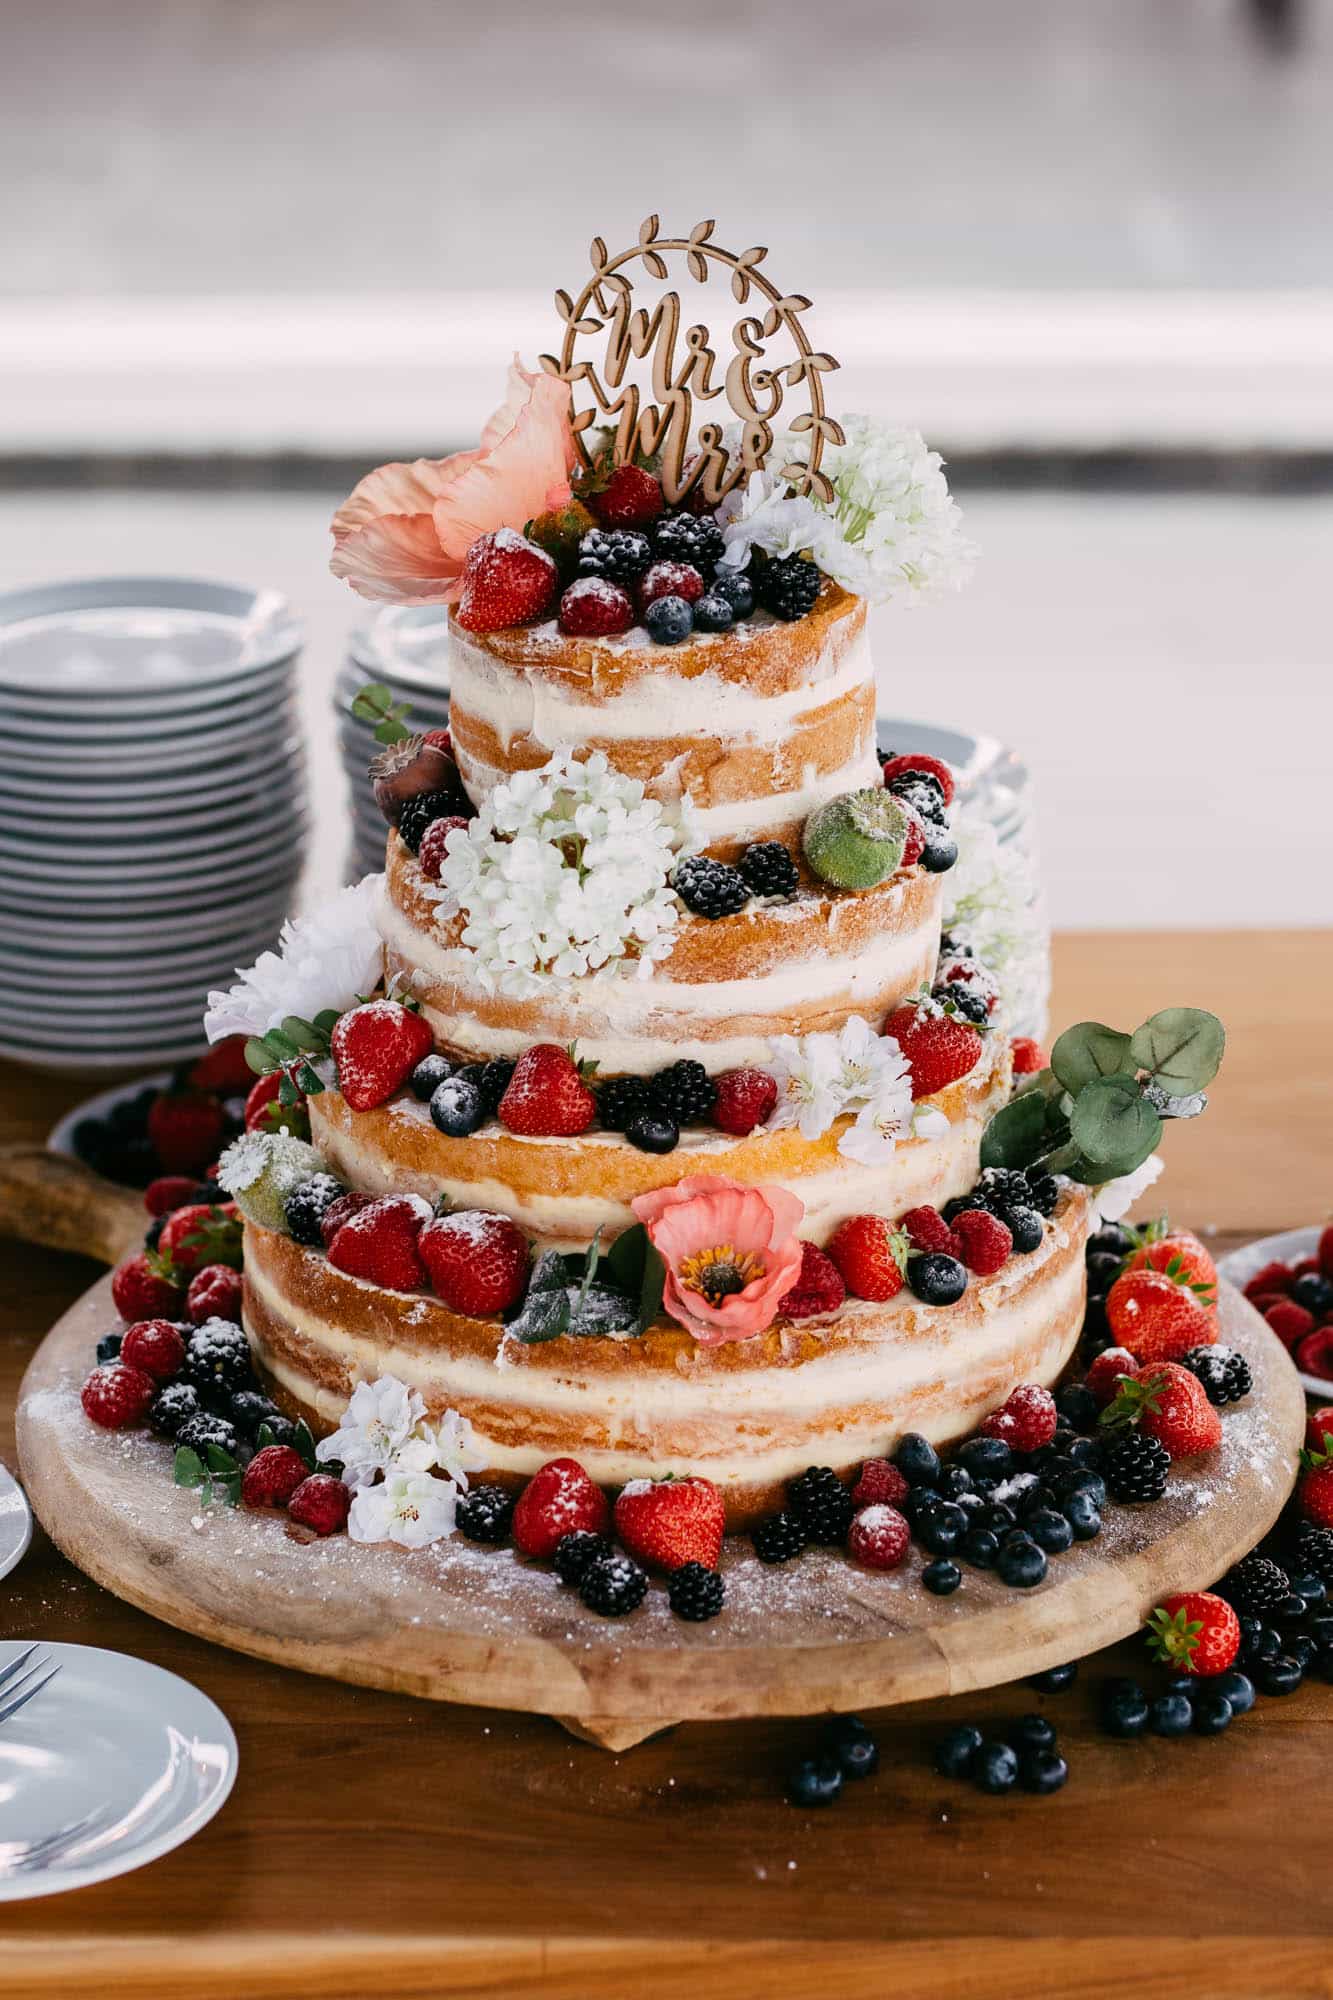 A wedding cake decorated with colourful berries and delicate flowers.